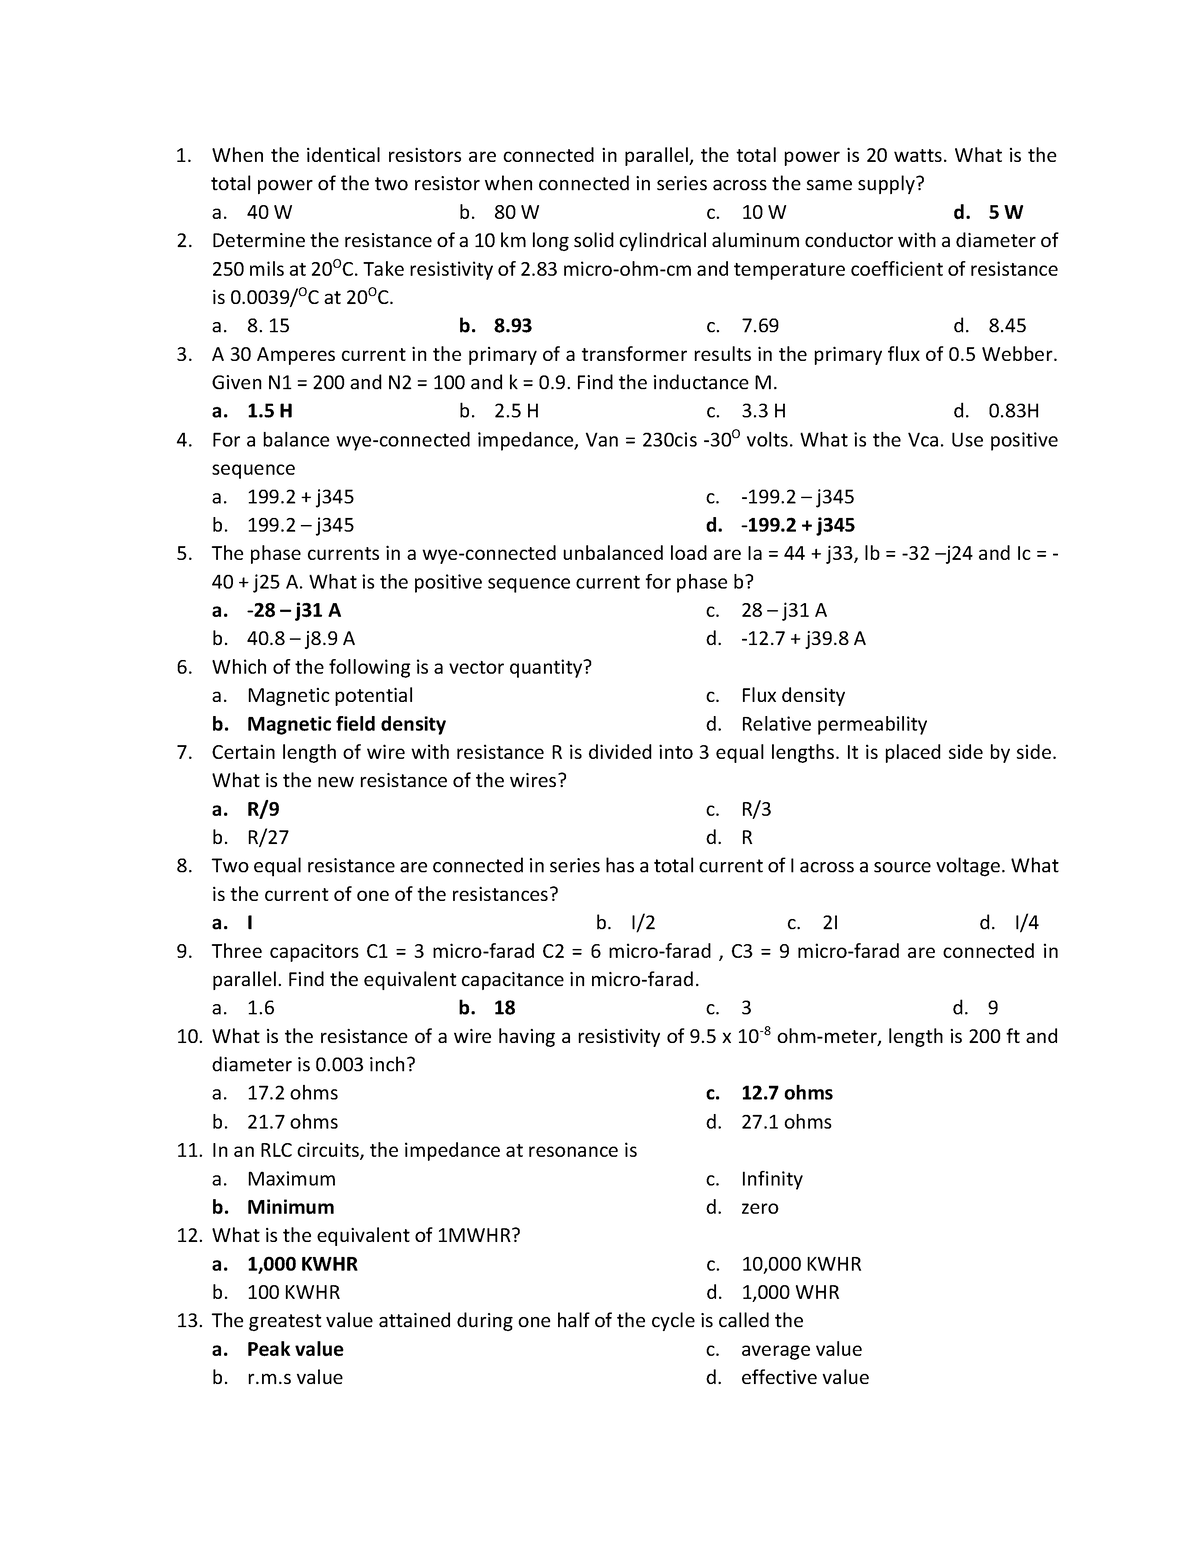 seatwork in electrical engineering with answer key - When the identical ...